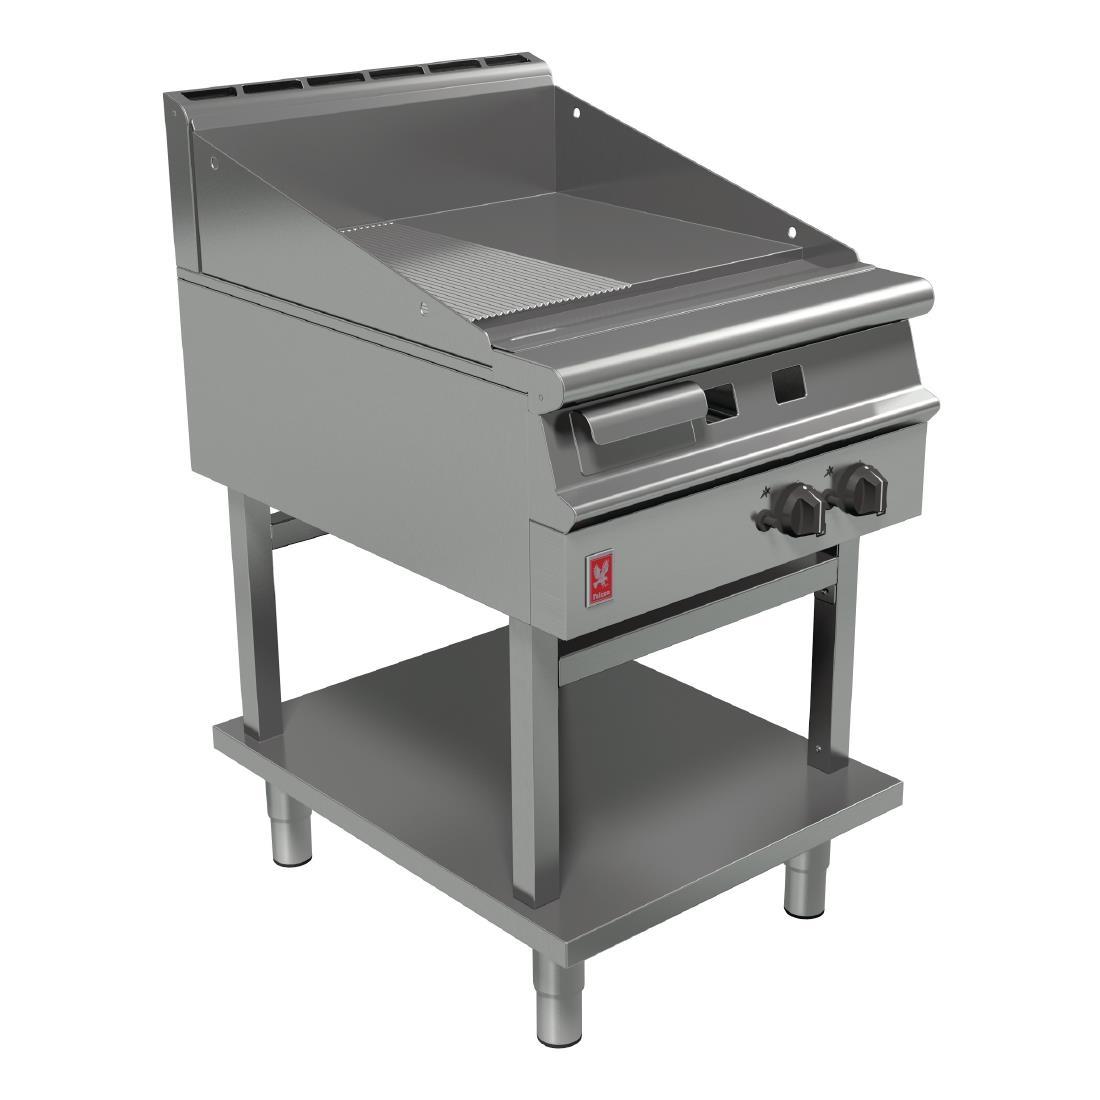 Falcon Dominator Plus 600mm Wide Half Ribbed Natural Gas Griddle on Fixed Stand G3641R - GP045-N  - 1